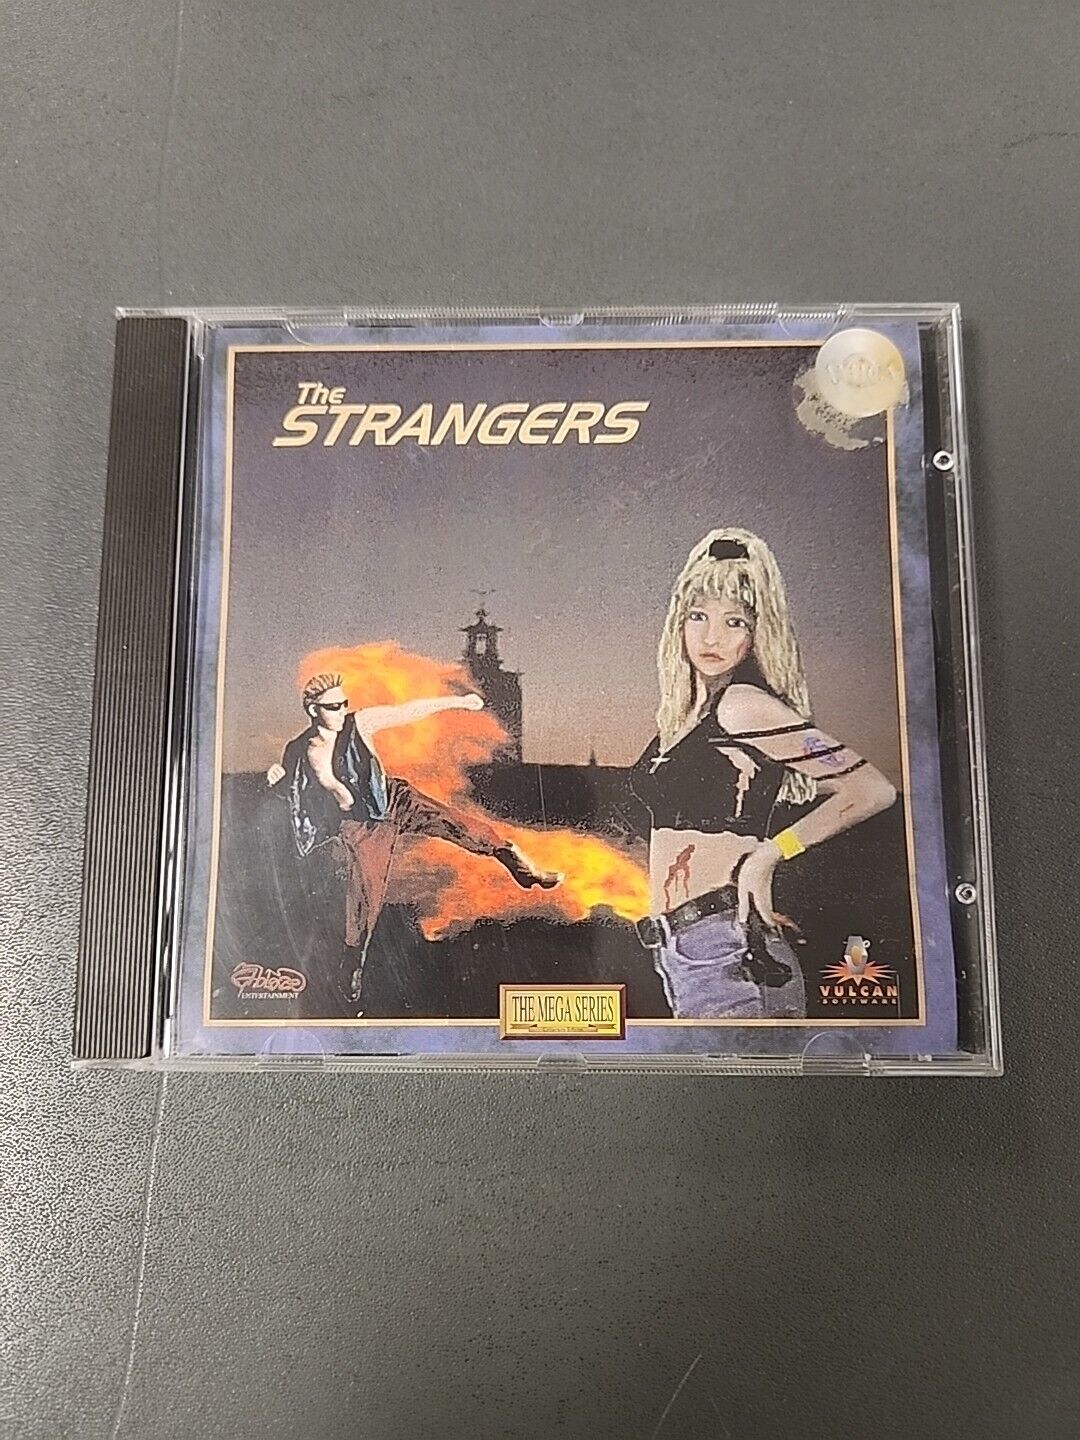 The Strangers by Vulcan Software CD for the Commodore Amiga A1200 / A4000 etc